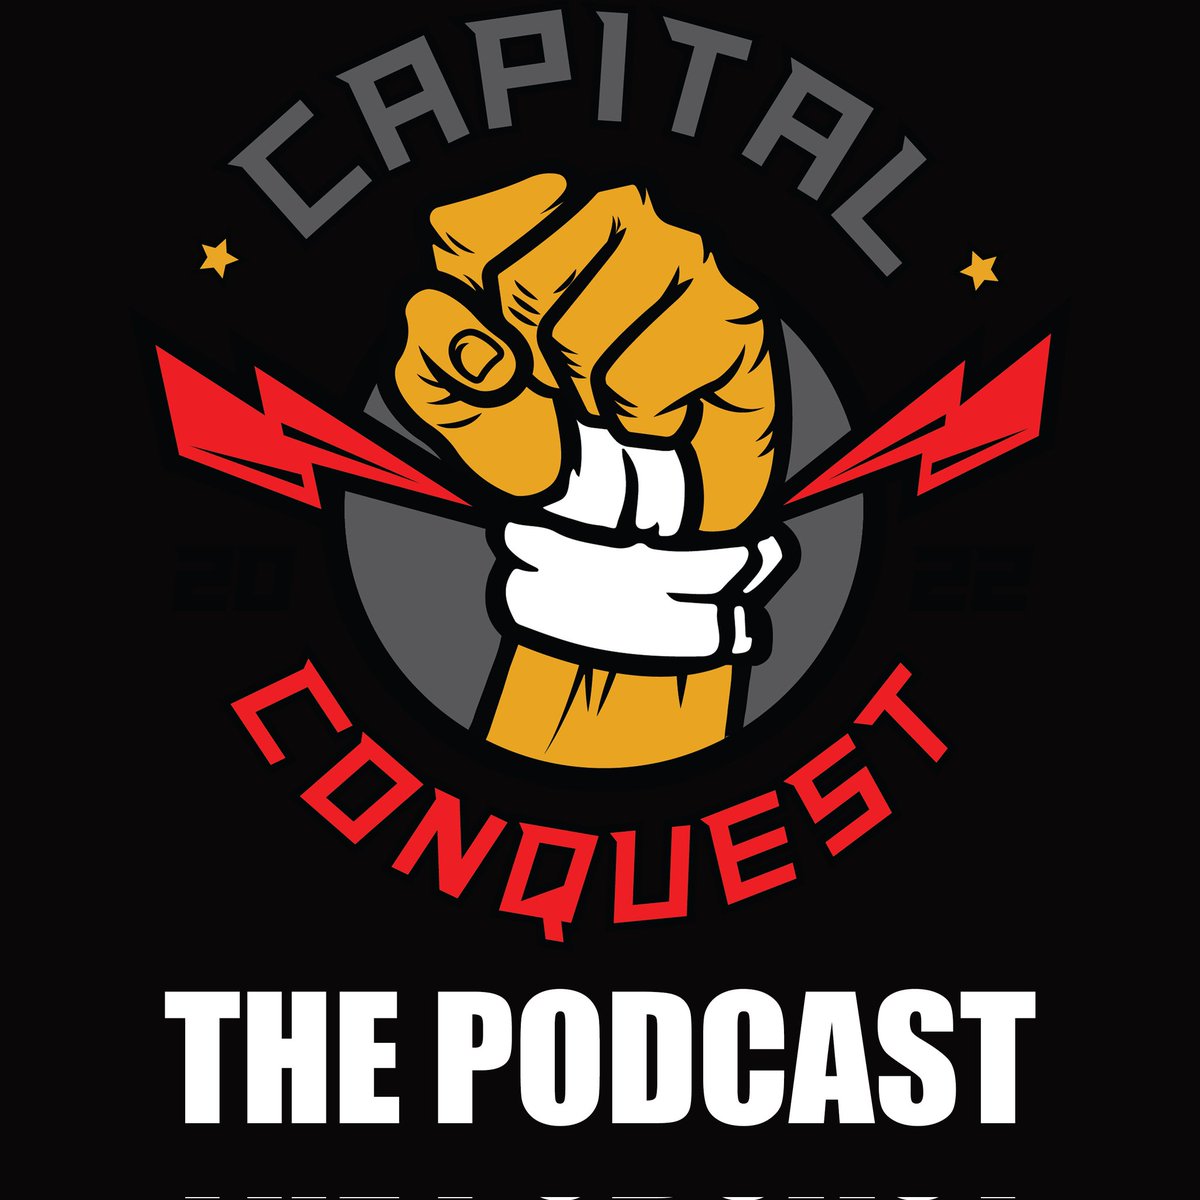 Proud to be a part of the NEW Capital Conquest Podcast featuring the influencers who have made and are continuing to make Capital Conquest the extraordinary event that it is.  New episodes will be launched every week starting Monday! #CapitalConquest #WorldKobudo #MartialArts